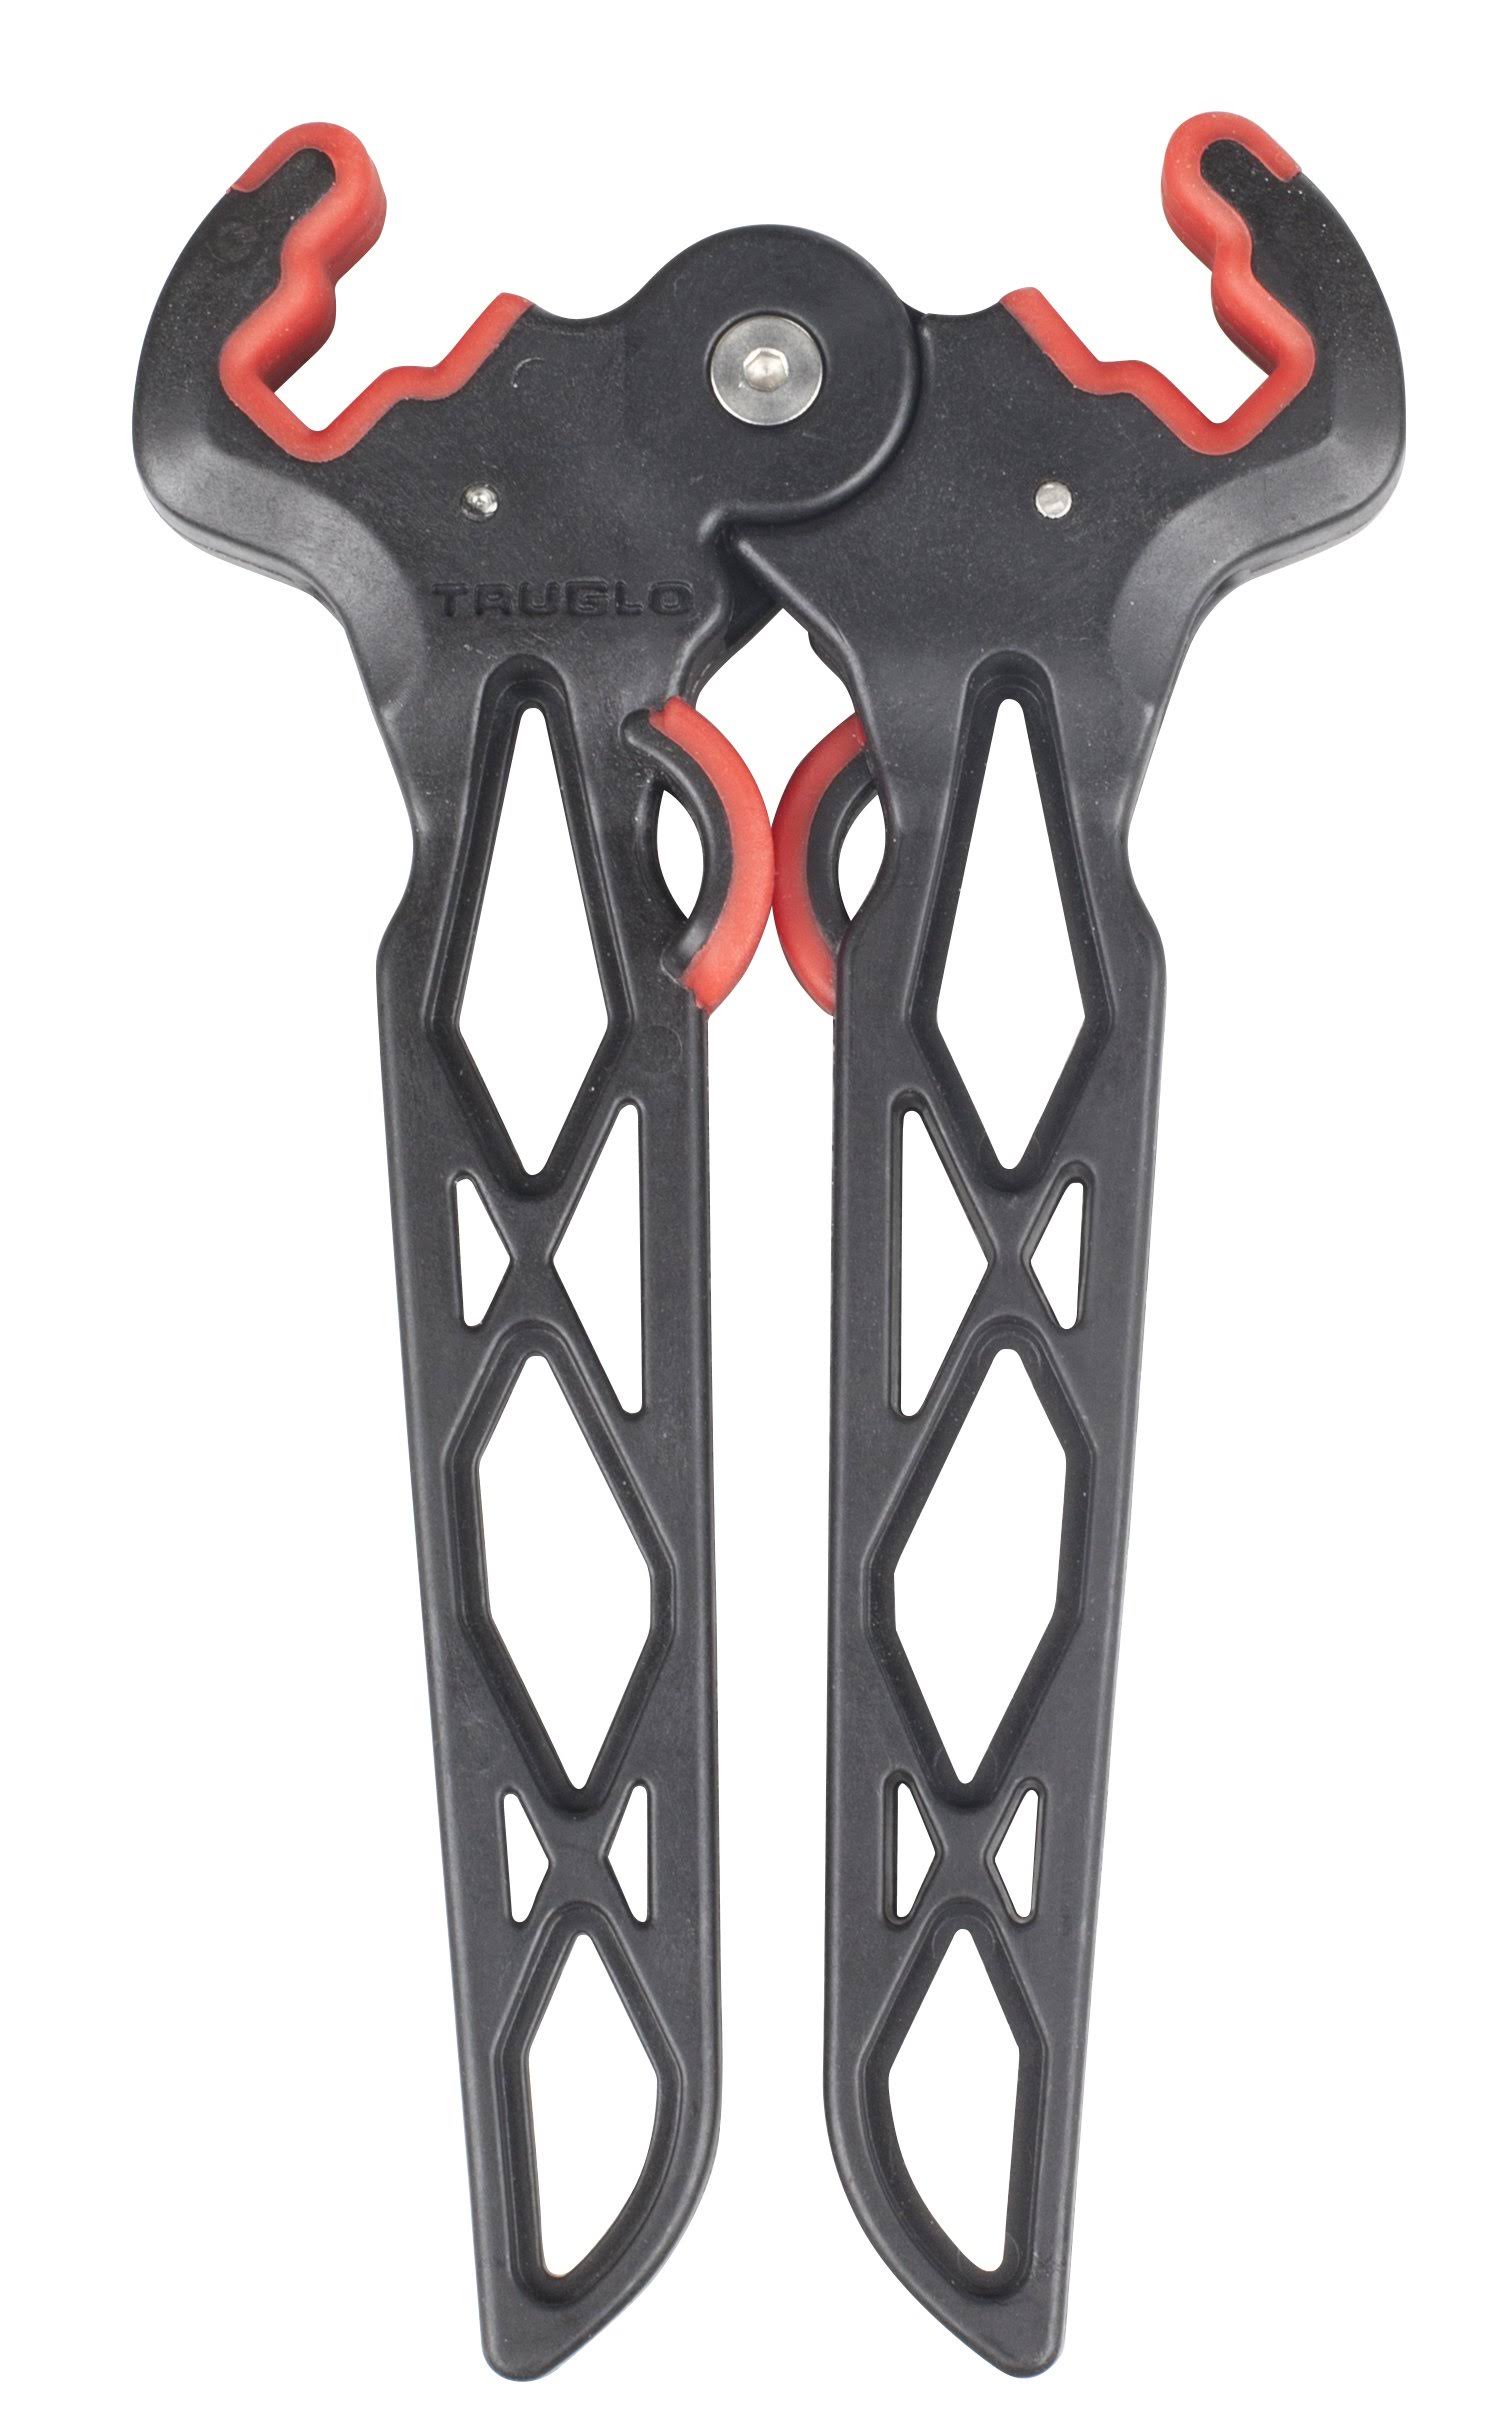 Truglo Mini Bow Stand - Black and Red